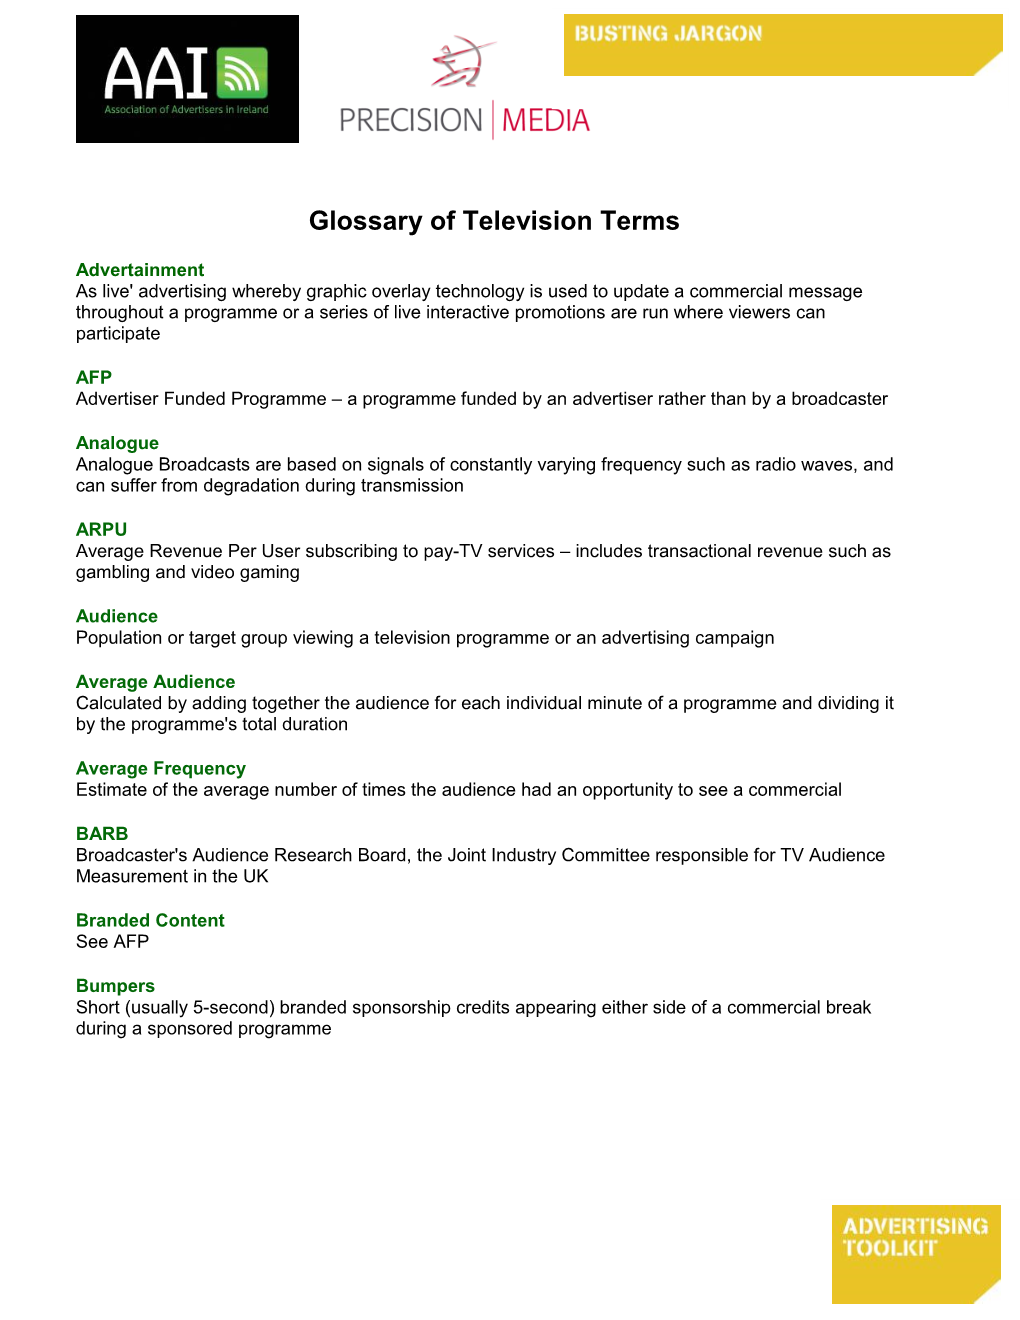 Glossary of Television Terms